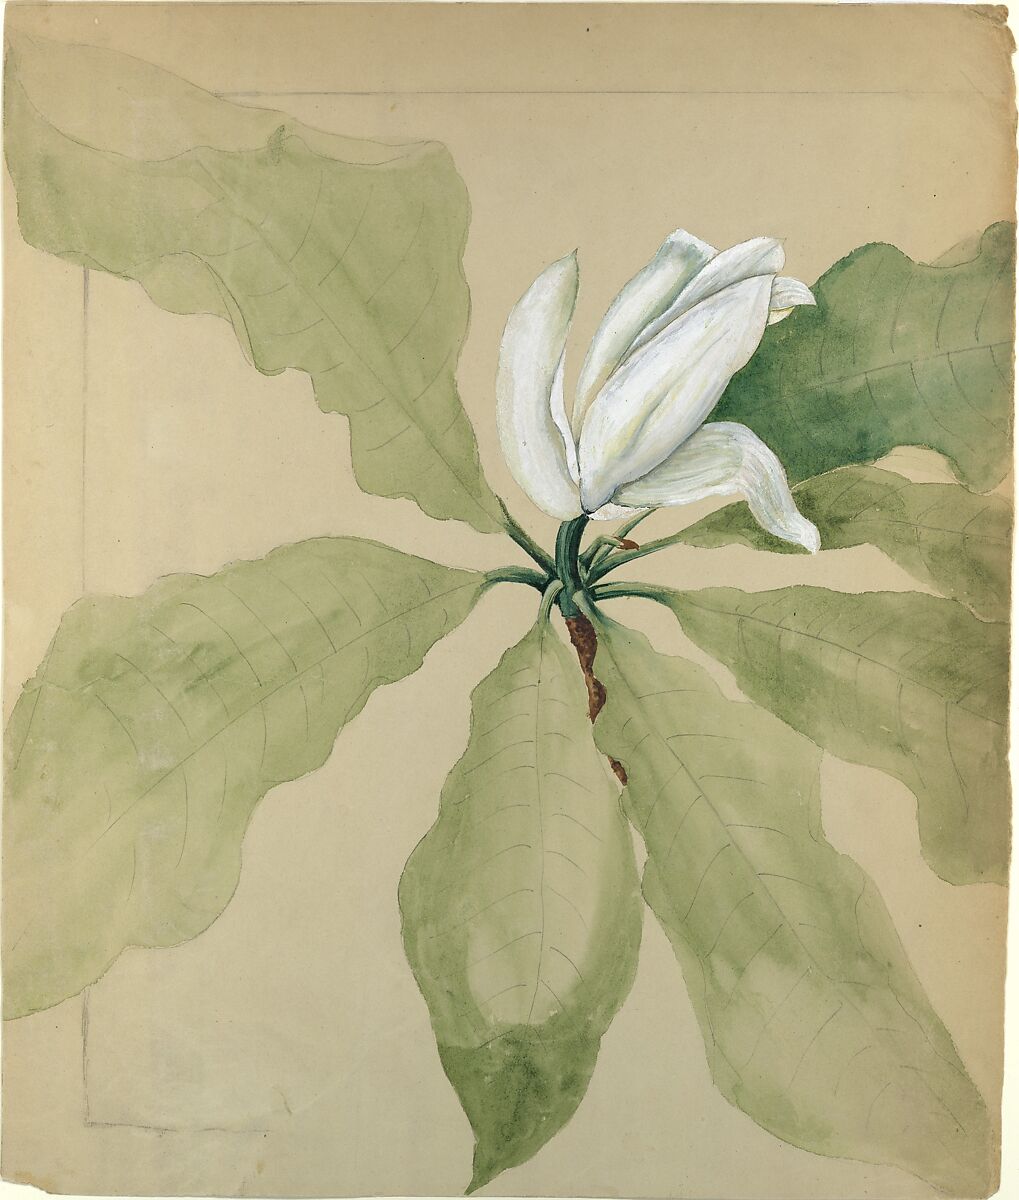 Study of Magnolia Blossom, Tiffany & Co., Opaque and transparent watercolor and graphite on paper, American